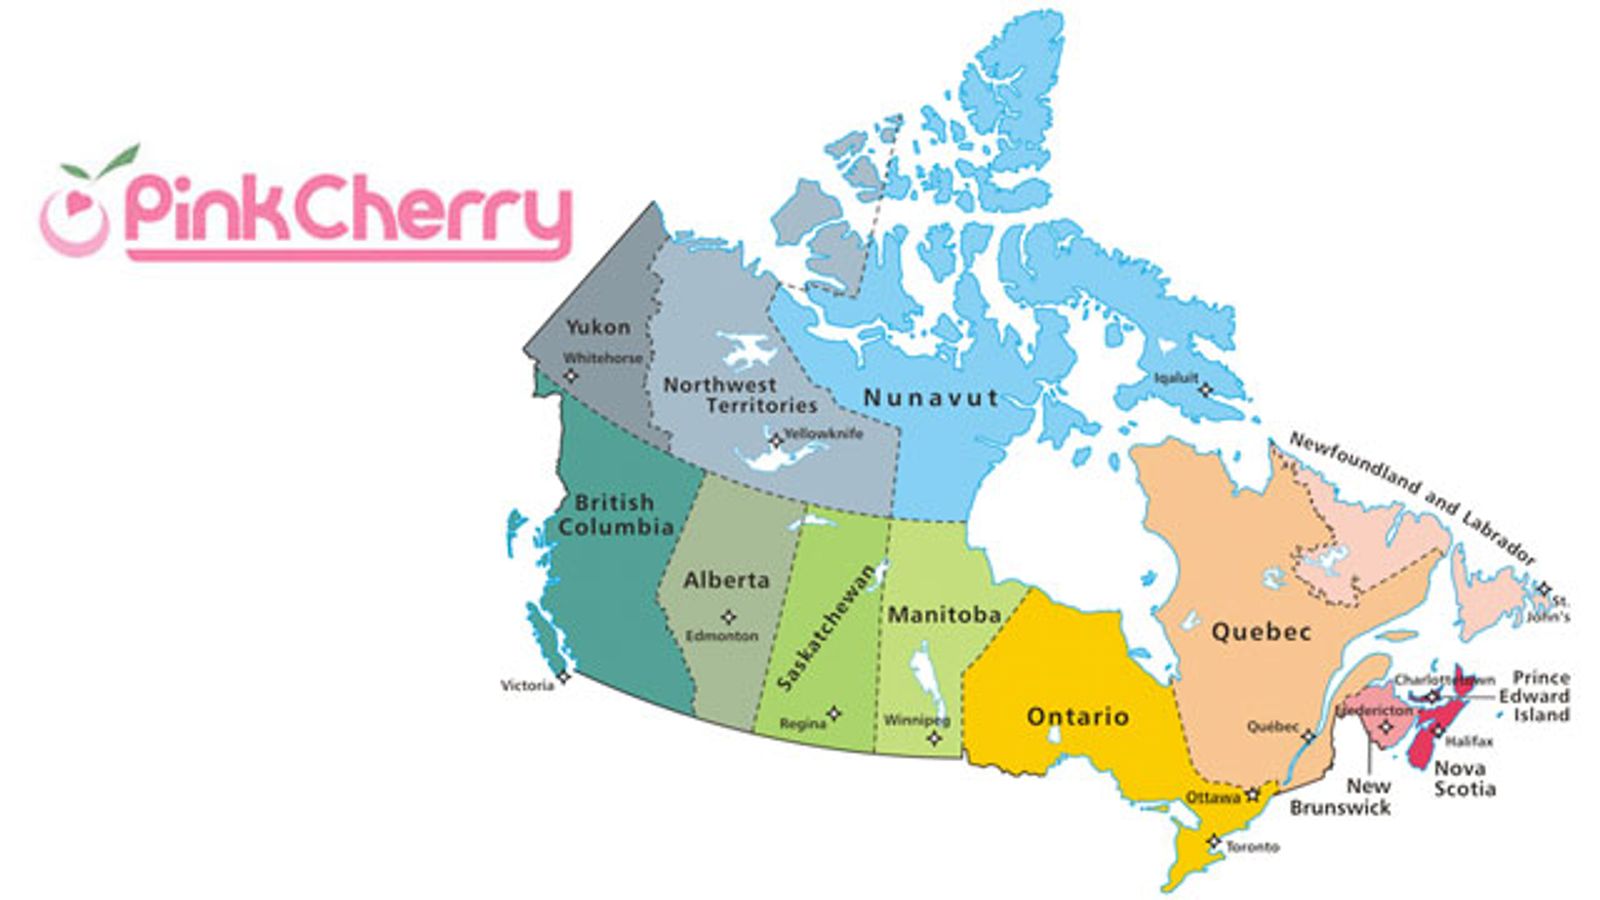 PinkCherry Releases Stats on Canadians' Sex Toy Spending